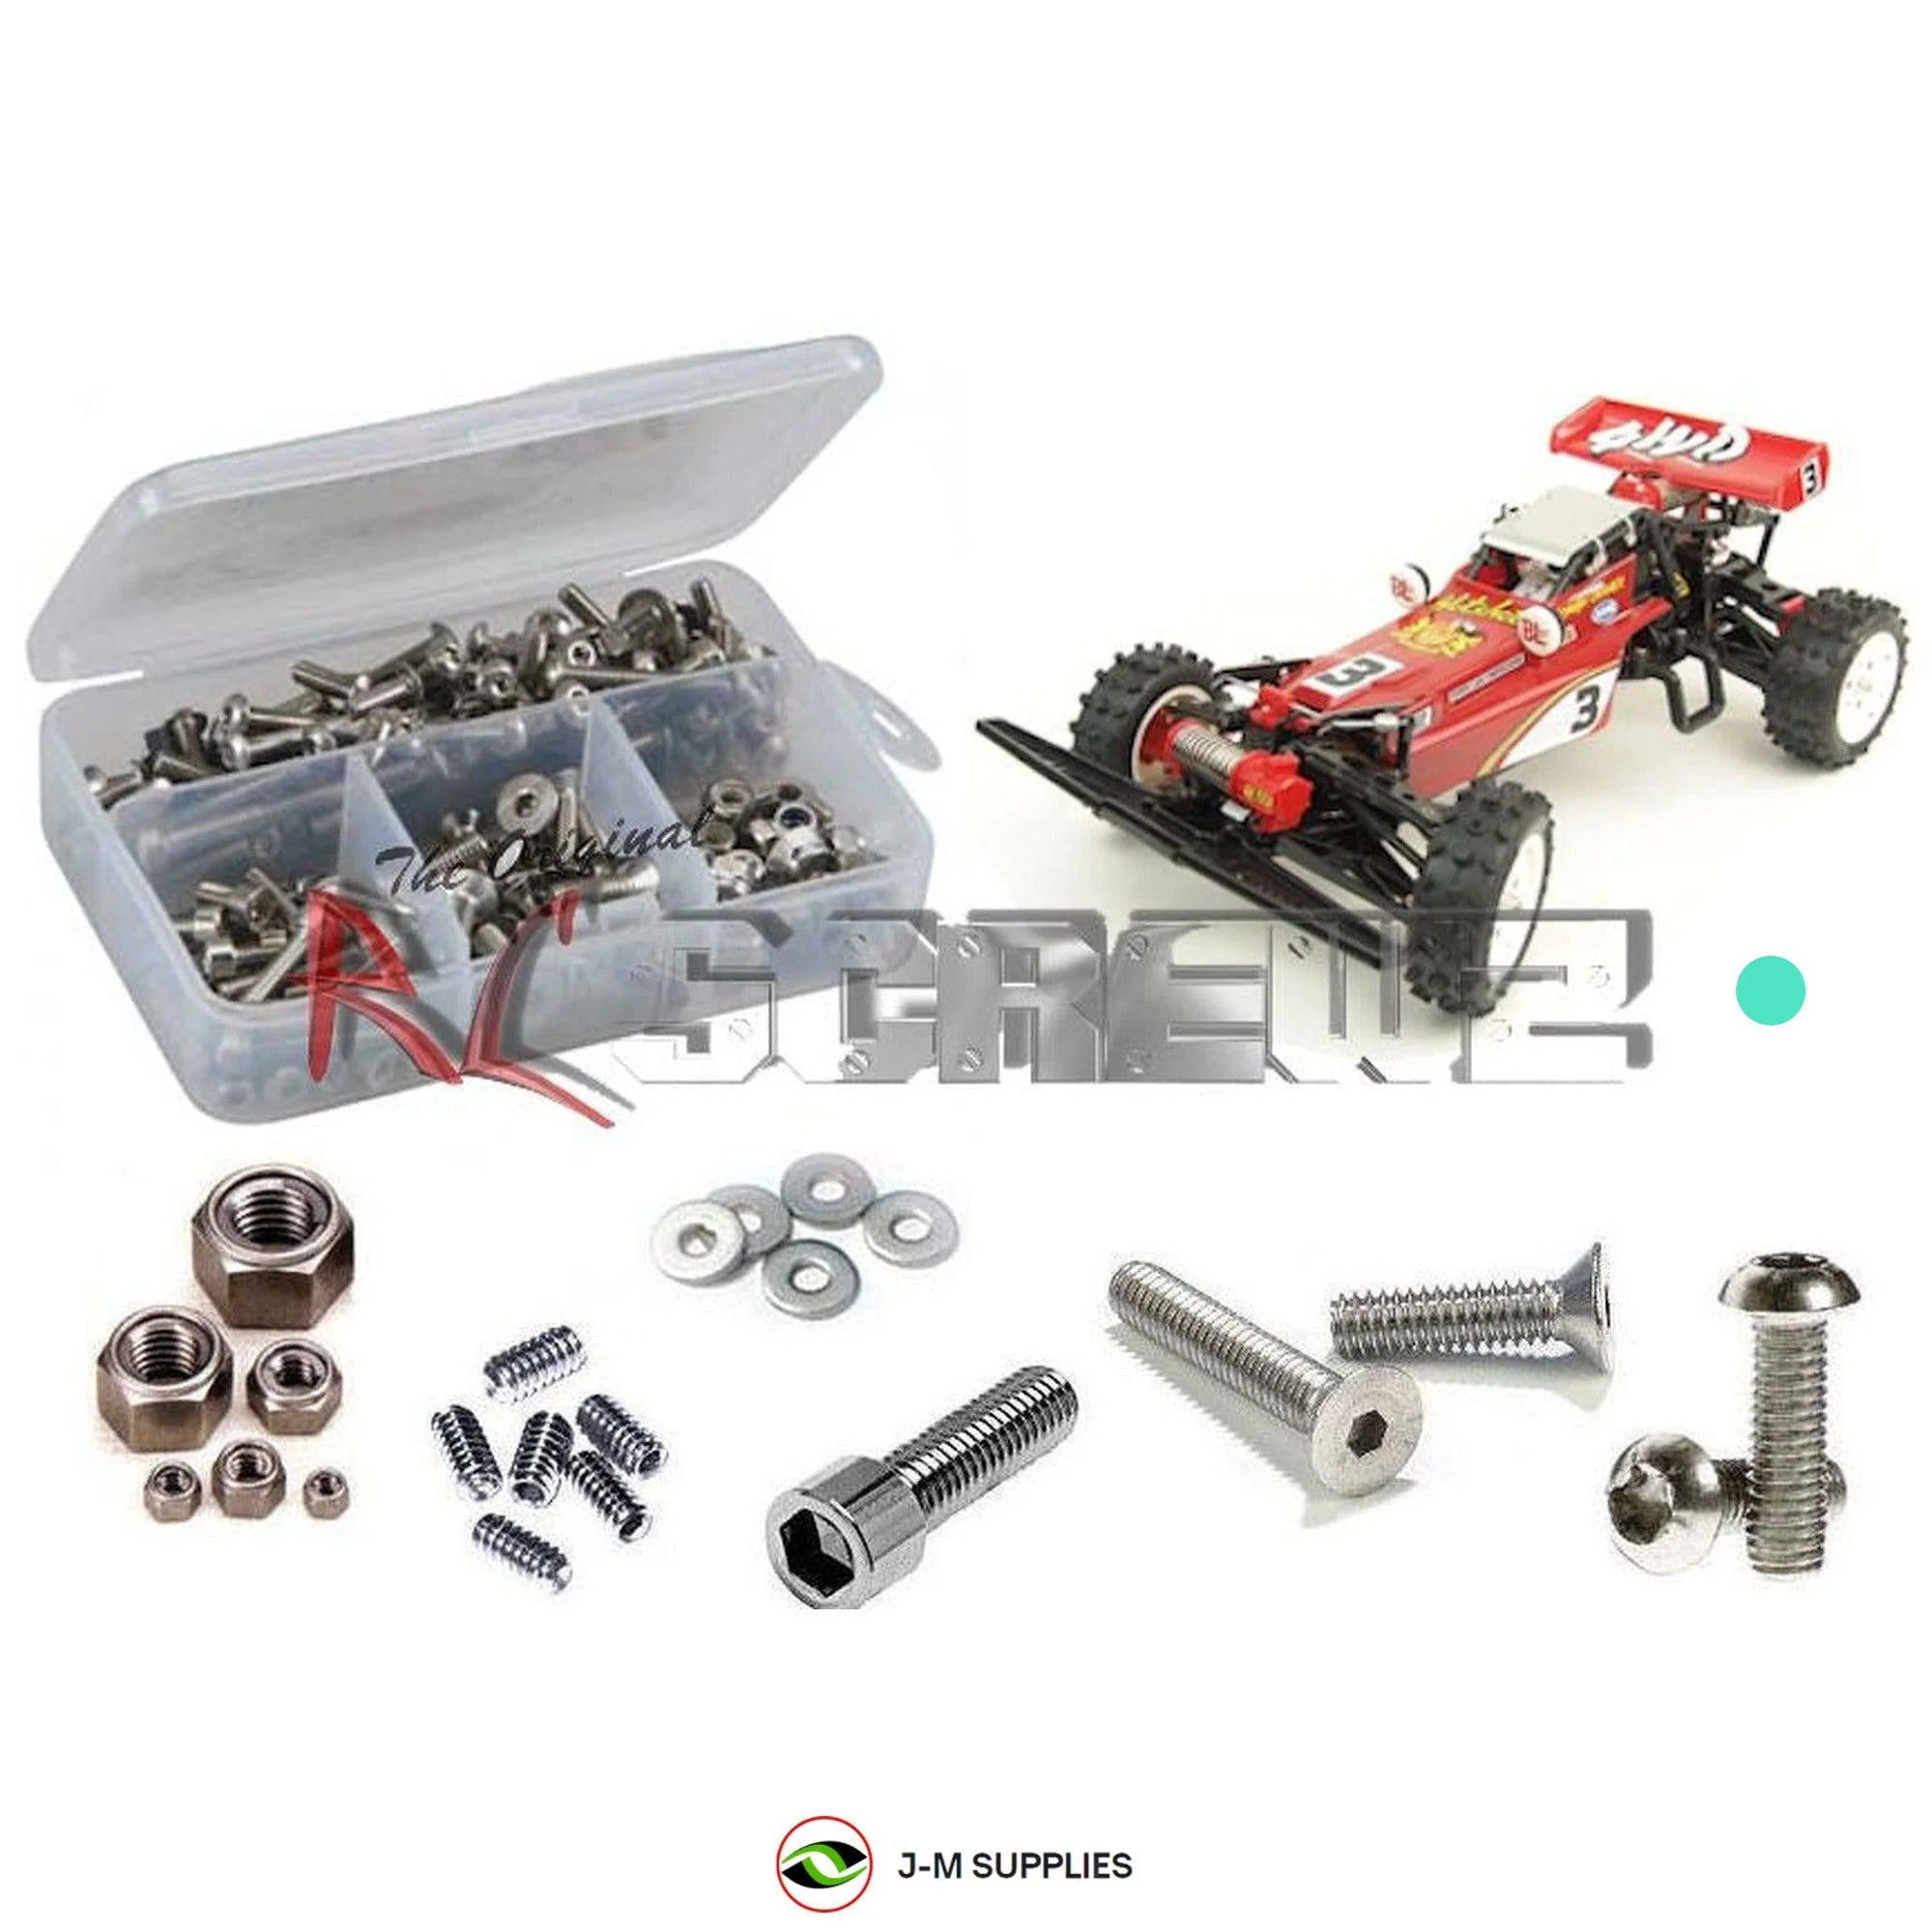 RCScrewZ Stainless Screw Kit tam156 for Tamiya HotShot Re-Release 1/10 #58391 - Picture 1 of 12